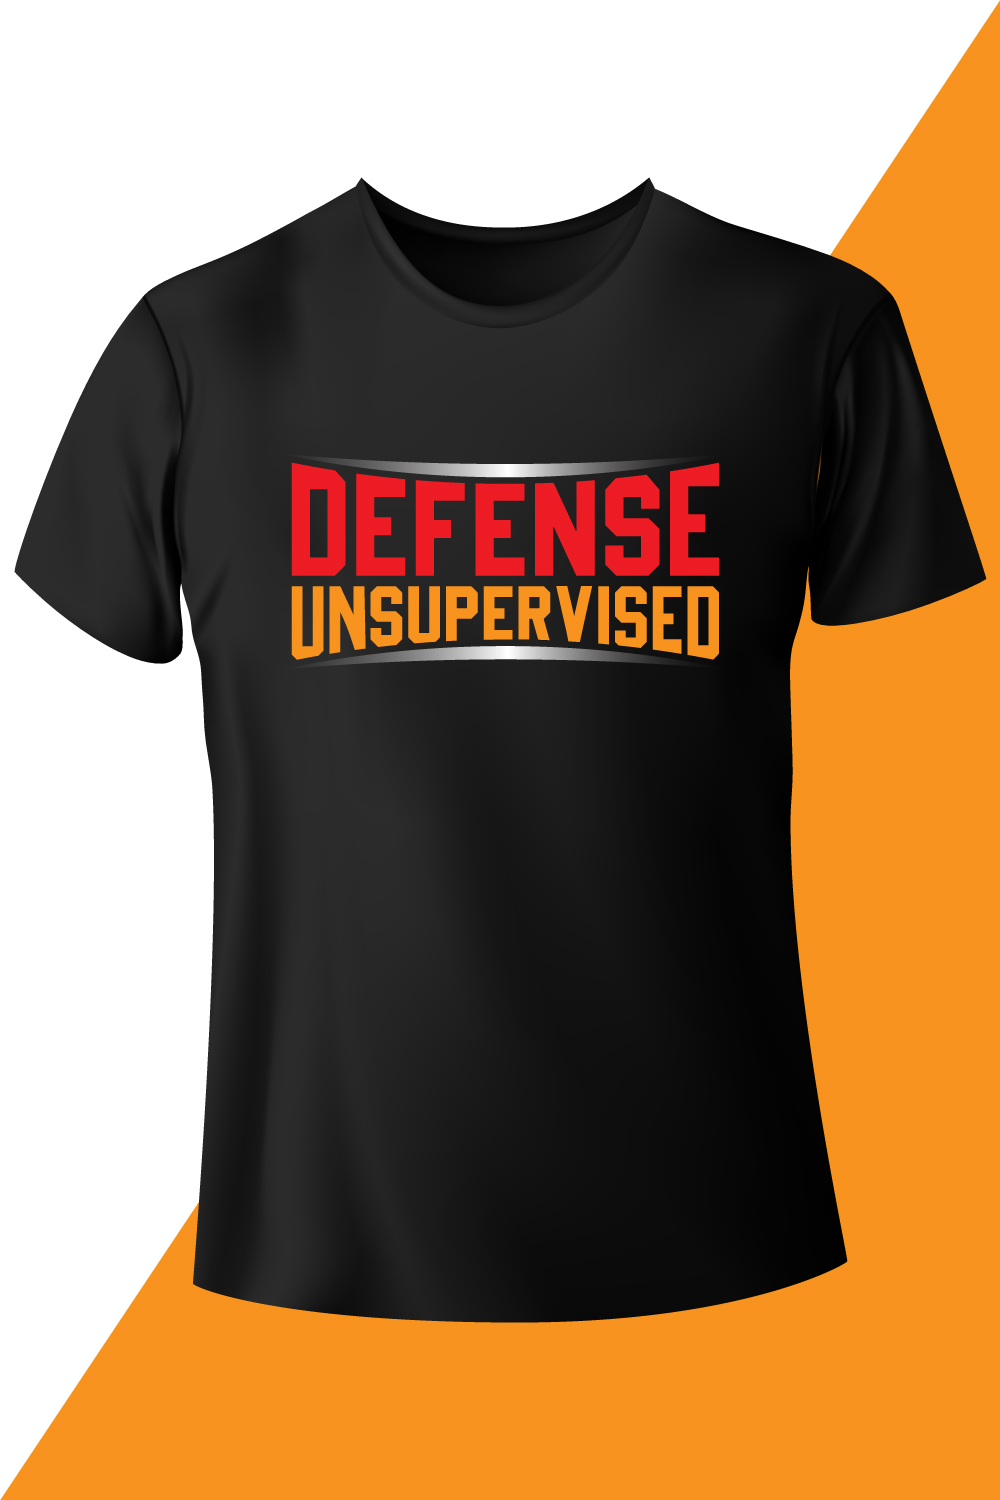 Image with a black t-shirt with a great inscription defense unsupervised.